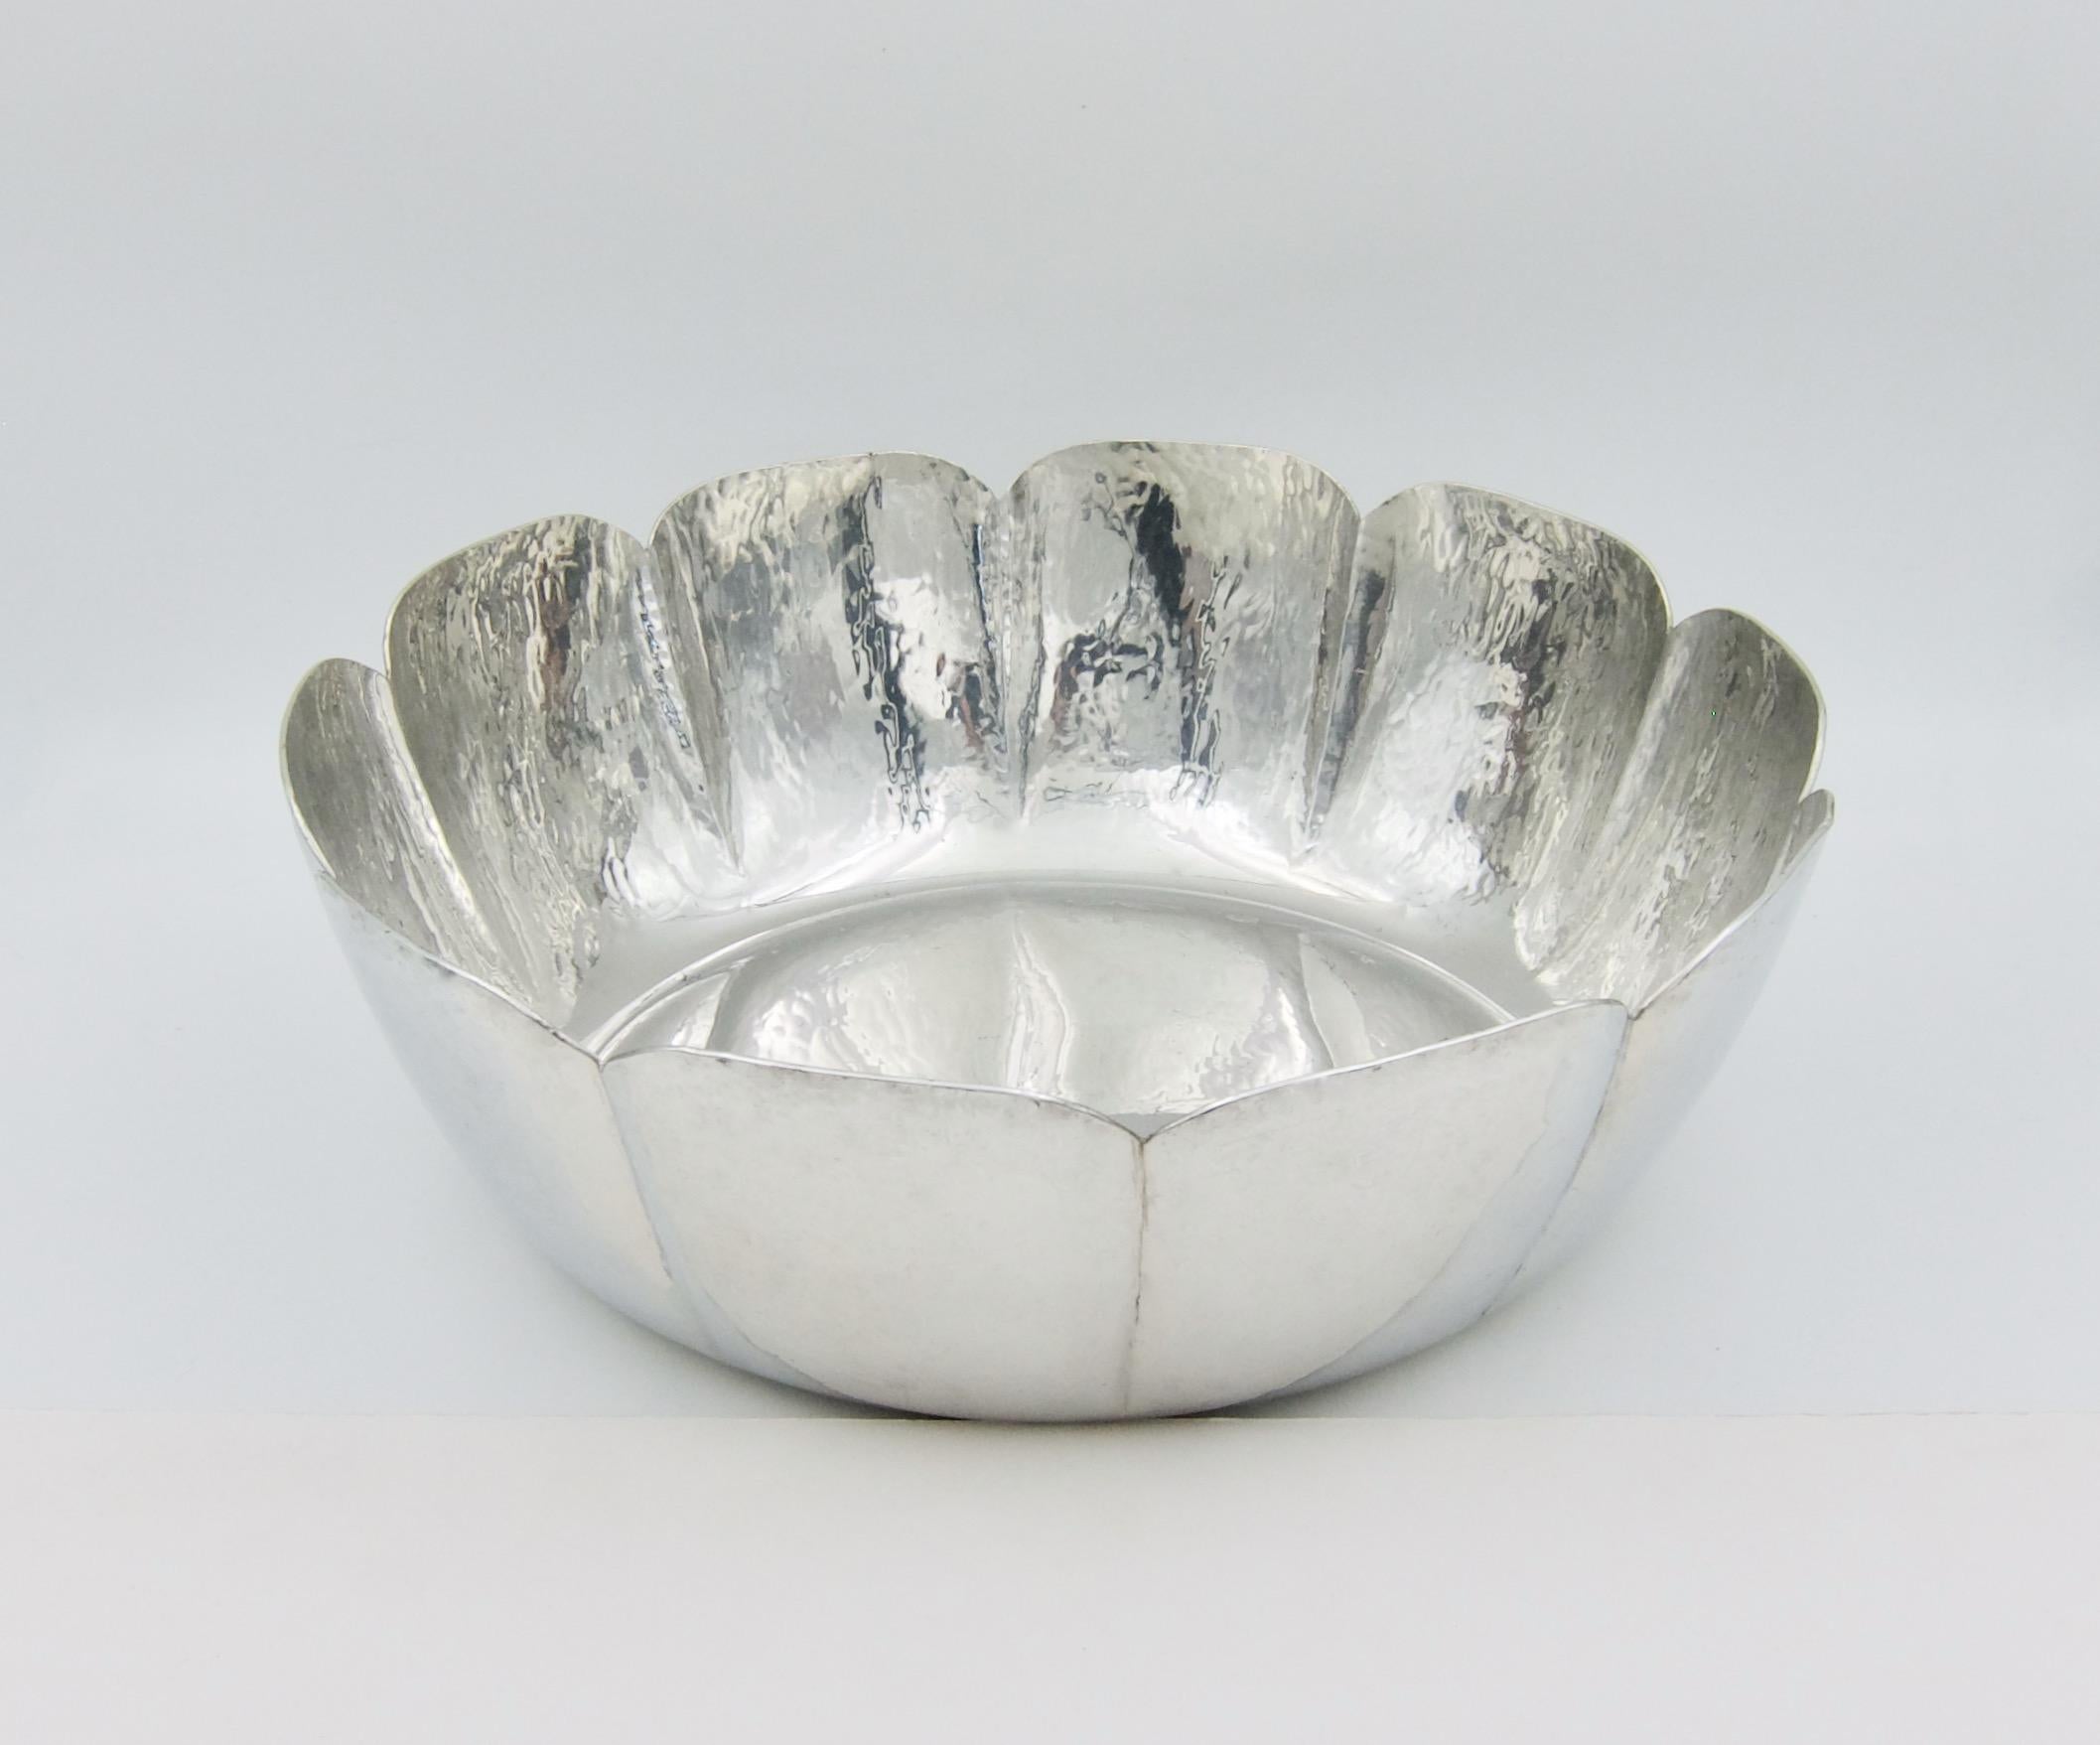 Modern Large Cartier Bowl in Hammered and Highly Polished Pewter